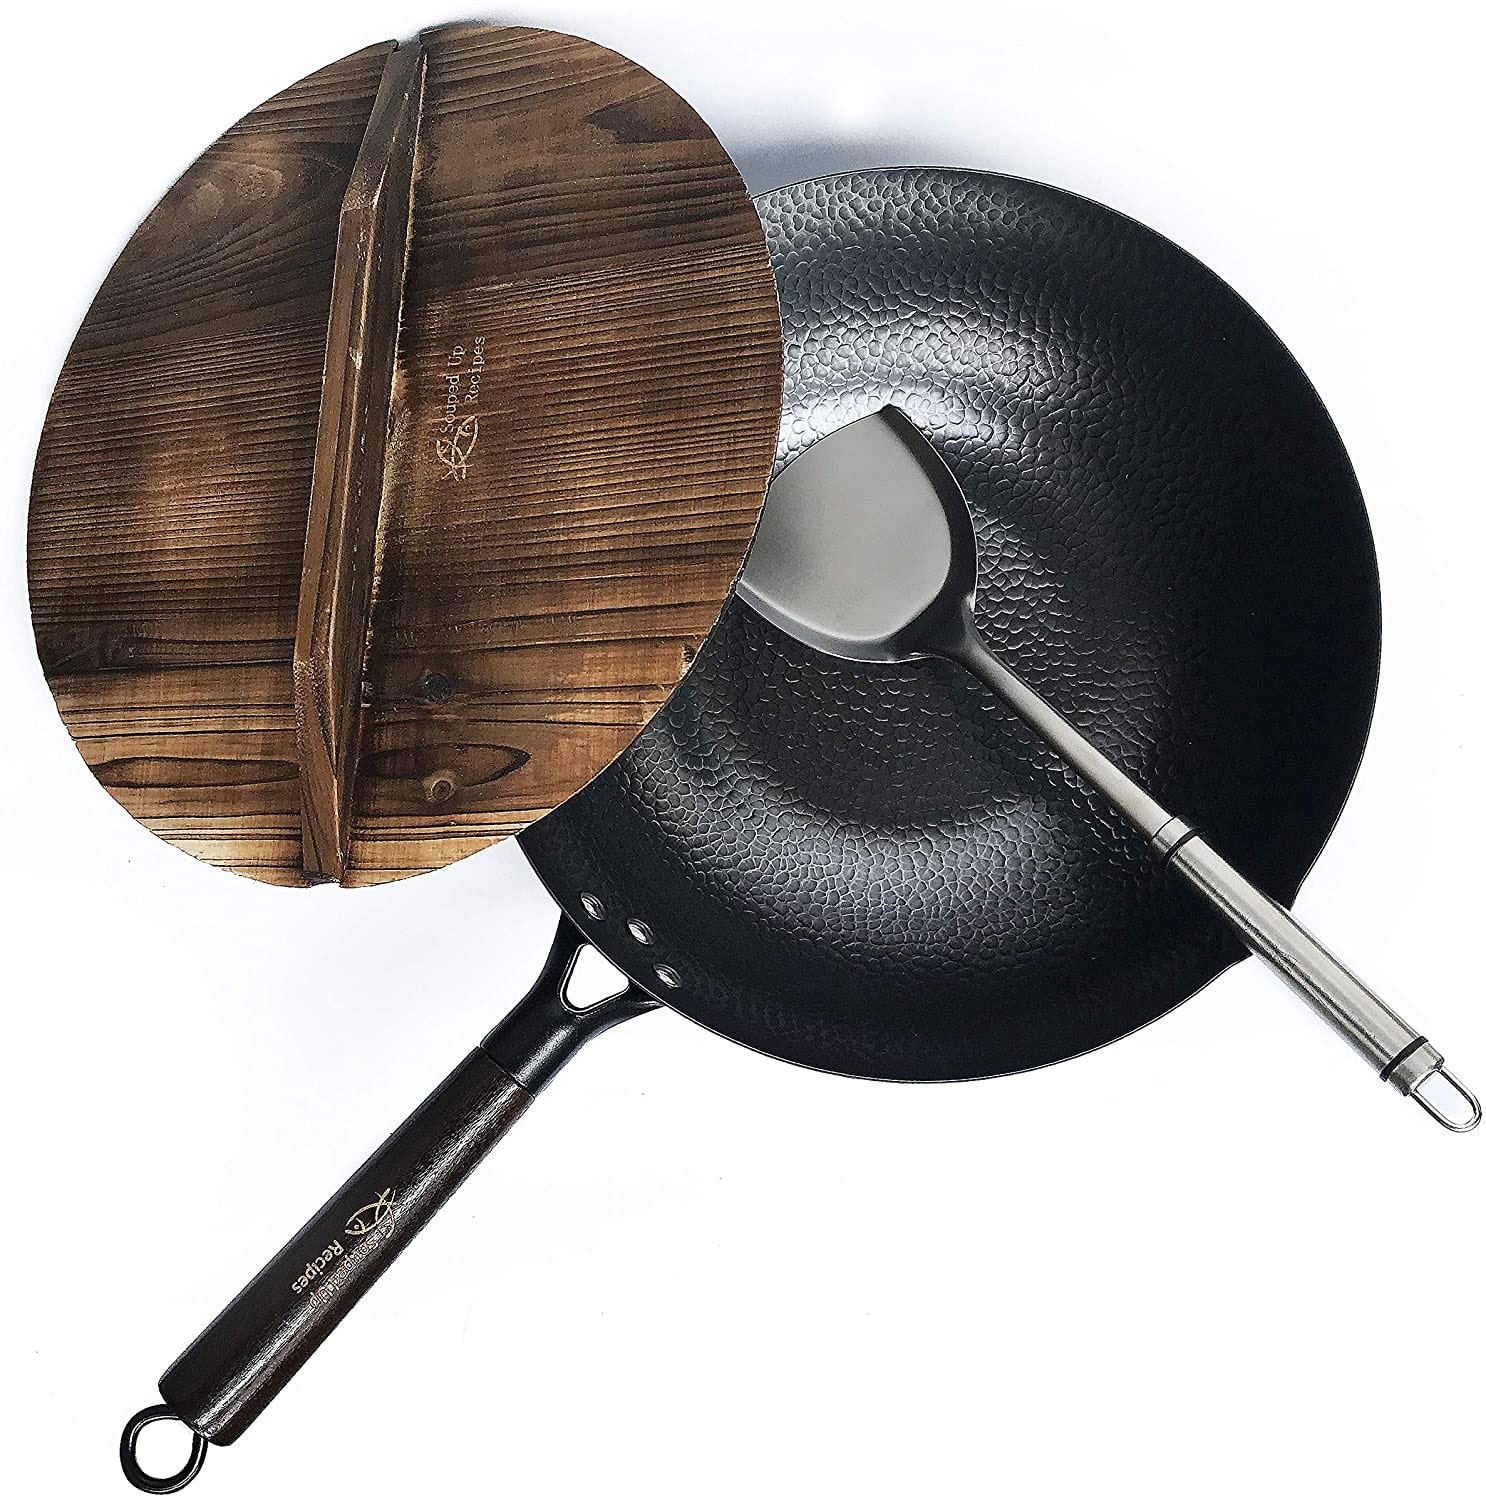 The 10 Best Wok Pans of 2021